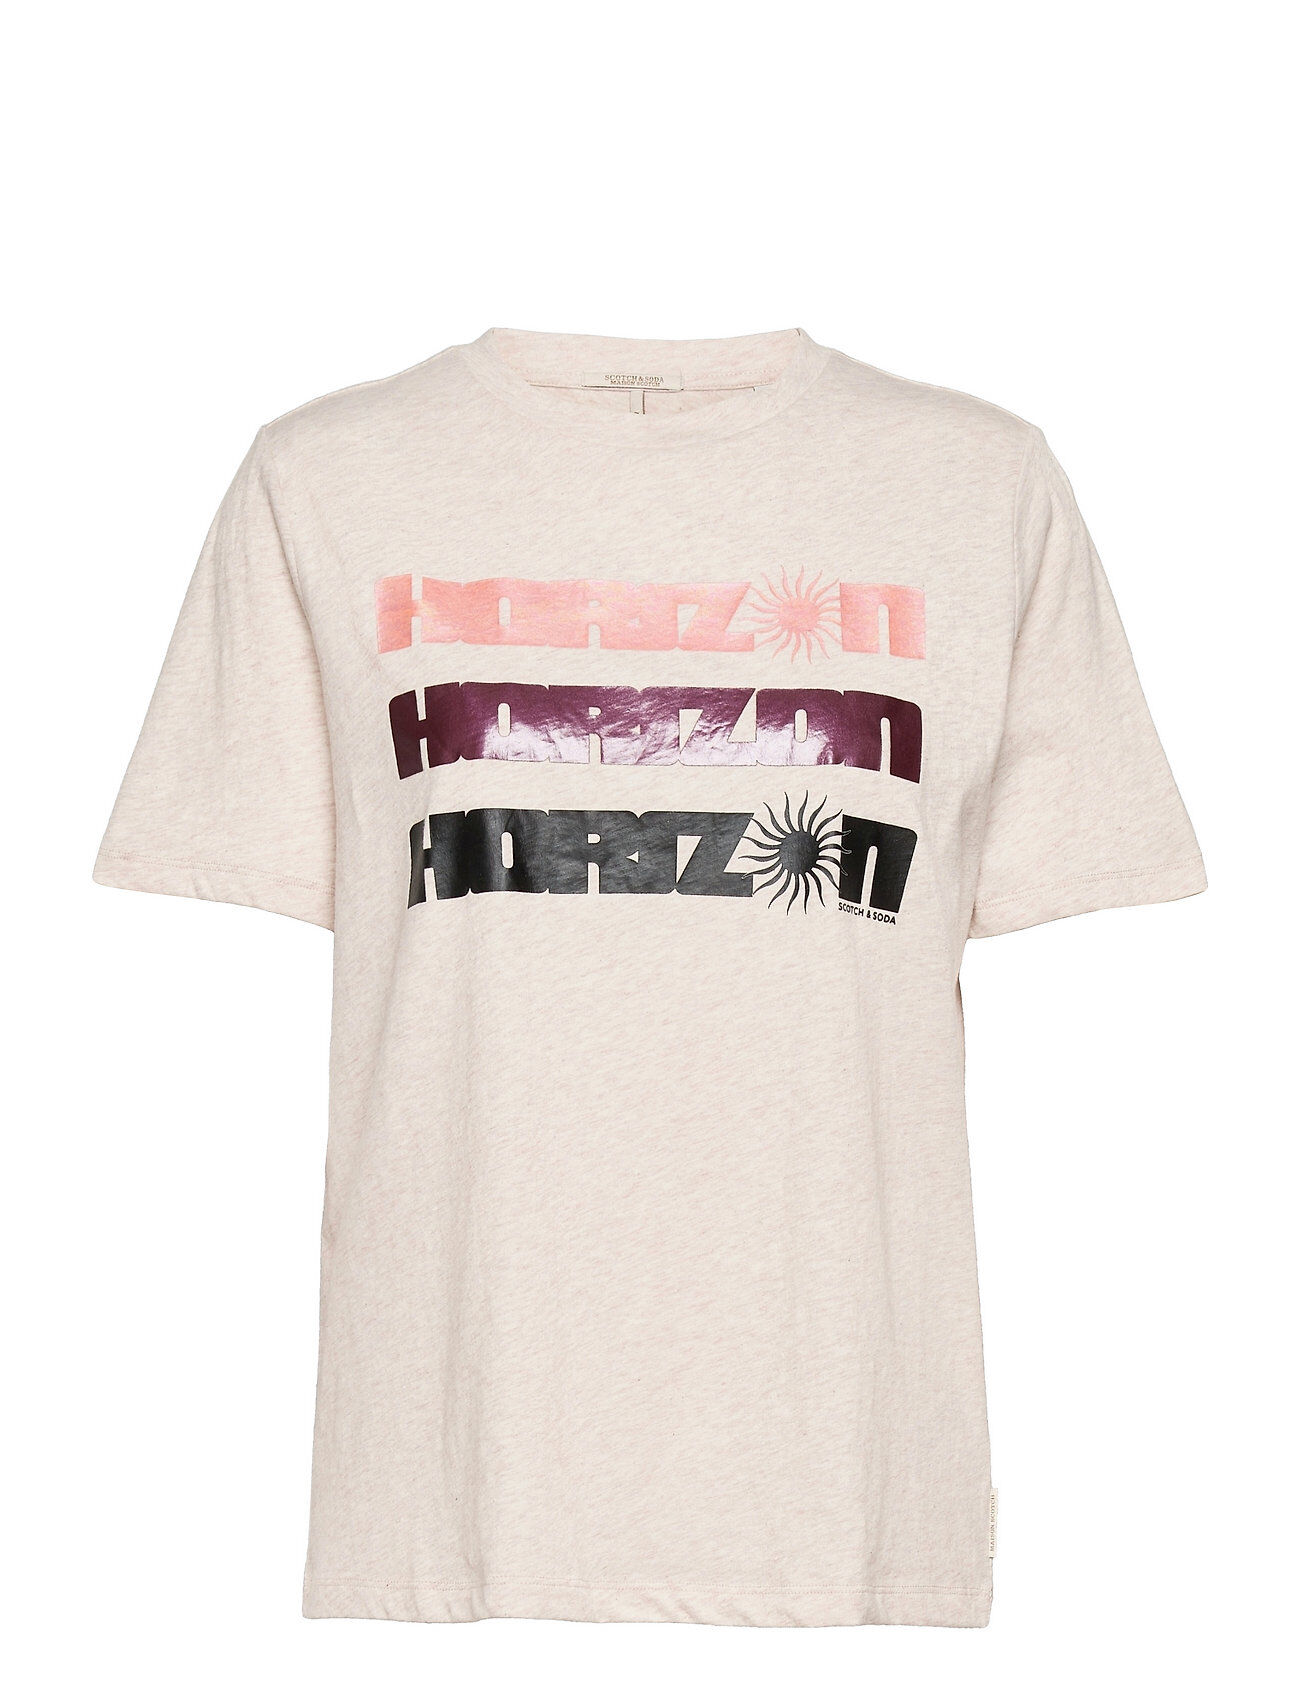 Scotch & Soda Organic Cotton Tee With Graphic T-shirts & Tops Short-sleeved Rosa Scotch & Soda